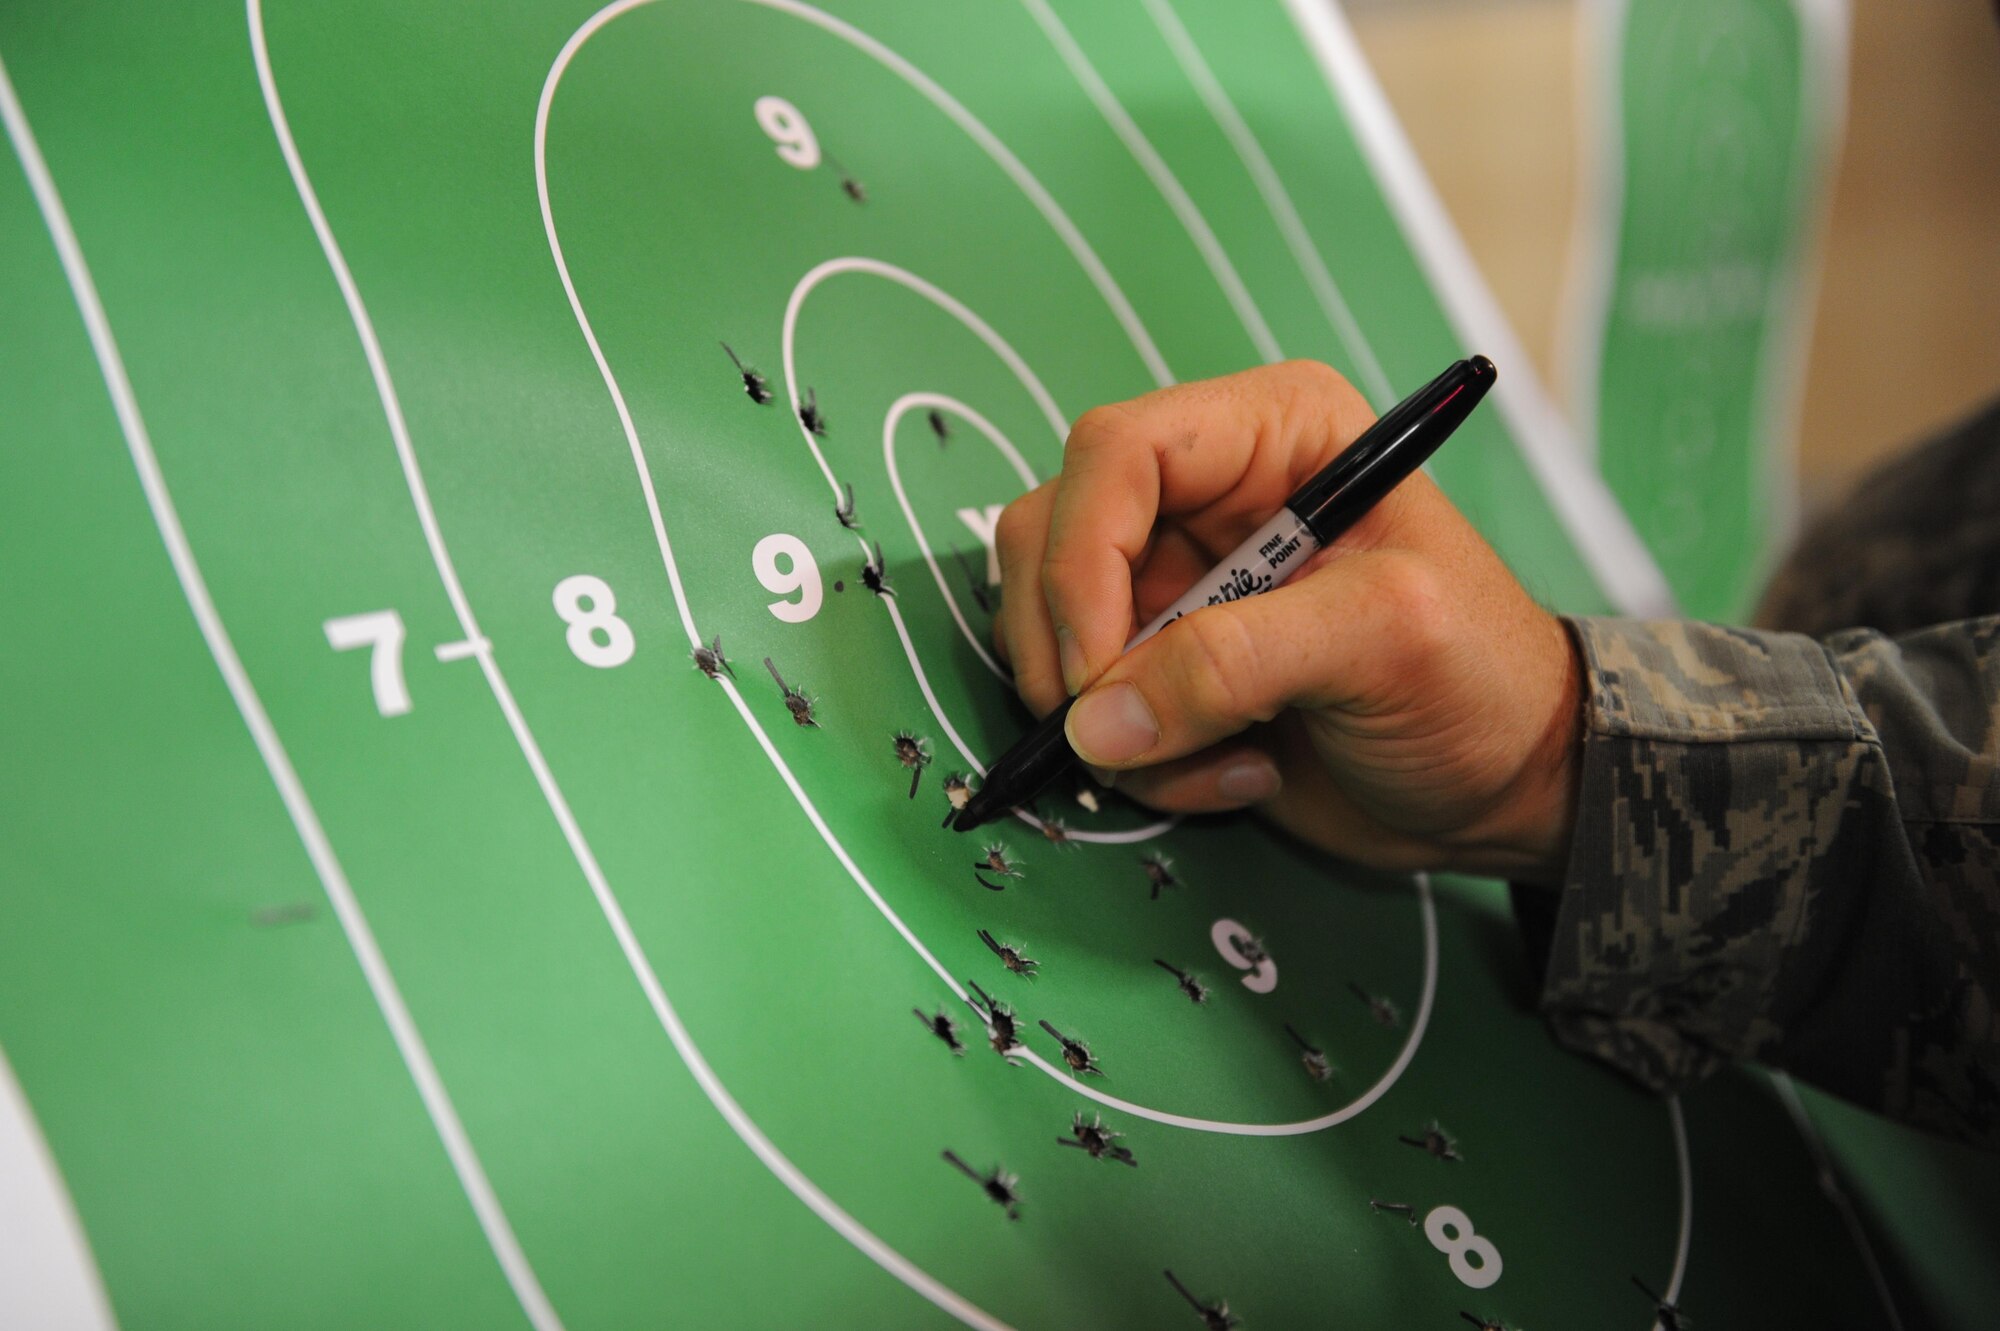 Staff Sgt. Jared Miller, 81st Security Forces Squadron combat arms instructor, calculates scores on targets during the 81st SFS Law Enforcement Team Competition May 18, 2016, Keesler Air Force Base, Miss. The competition was held during National Police Week, which recognizes the service of law enforcement men and women who put their lives at risk every day. (U.S. Air Force photo by Kemberly Groue)